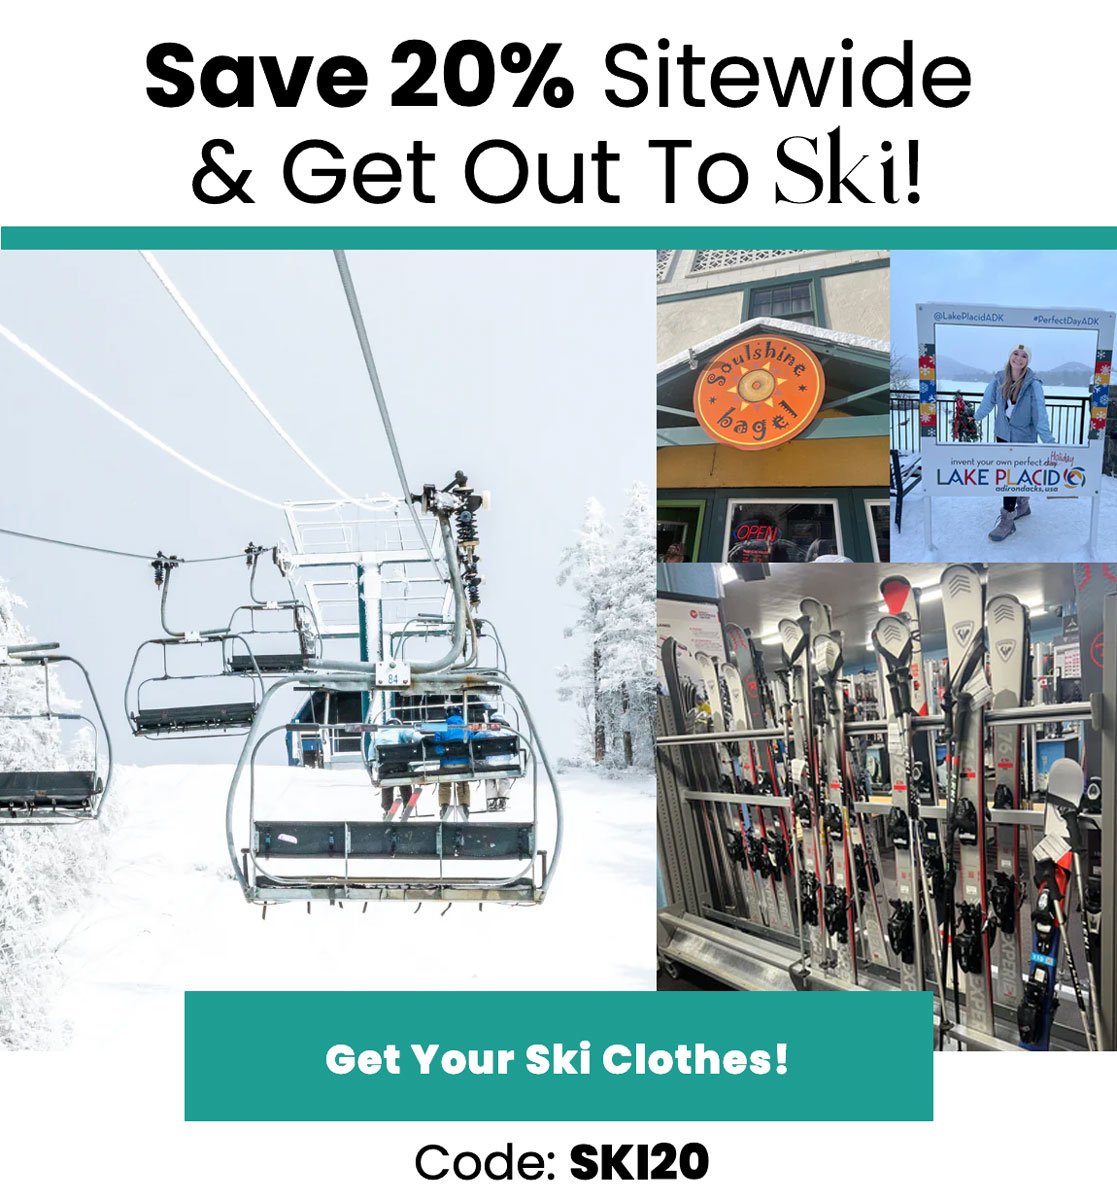 Save 20% Sitewide & Get Out to Ski!